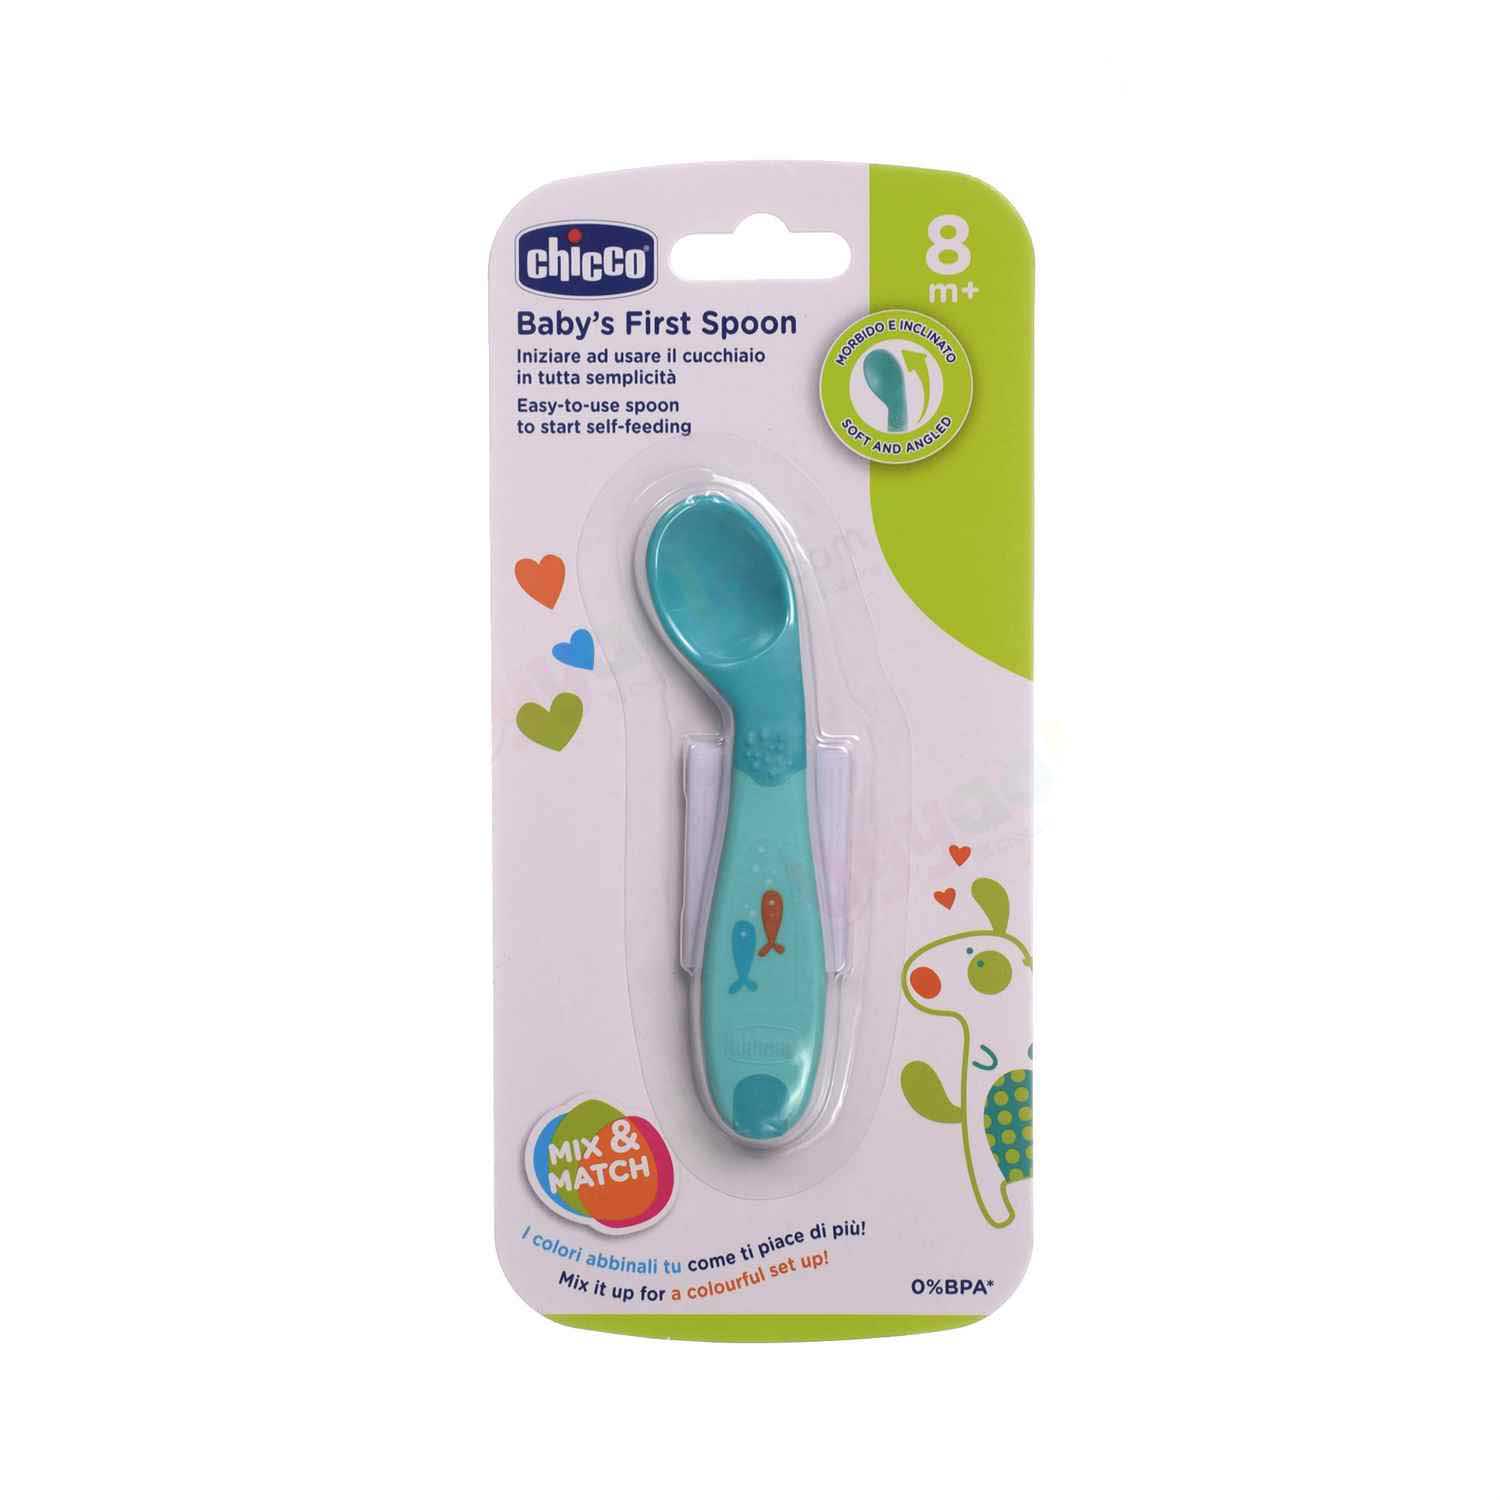 Chicco Baby's First Spoon 8+m Age, Blue